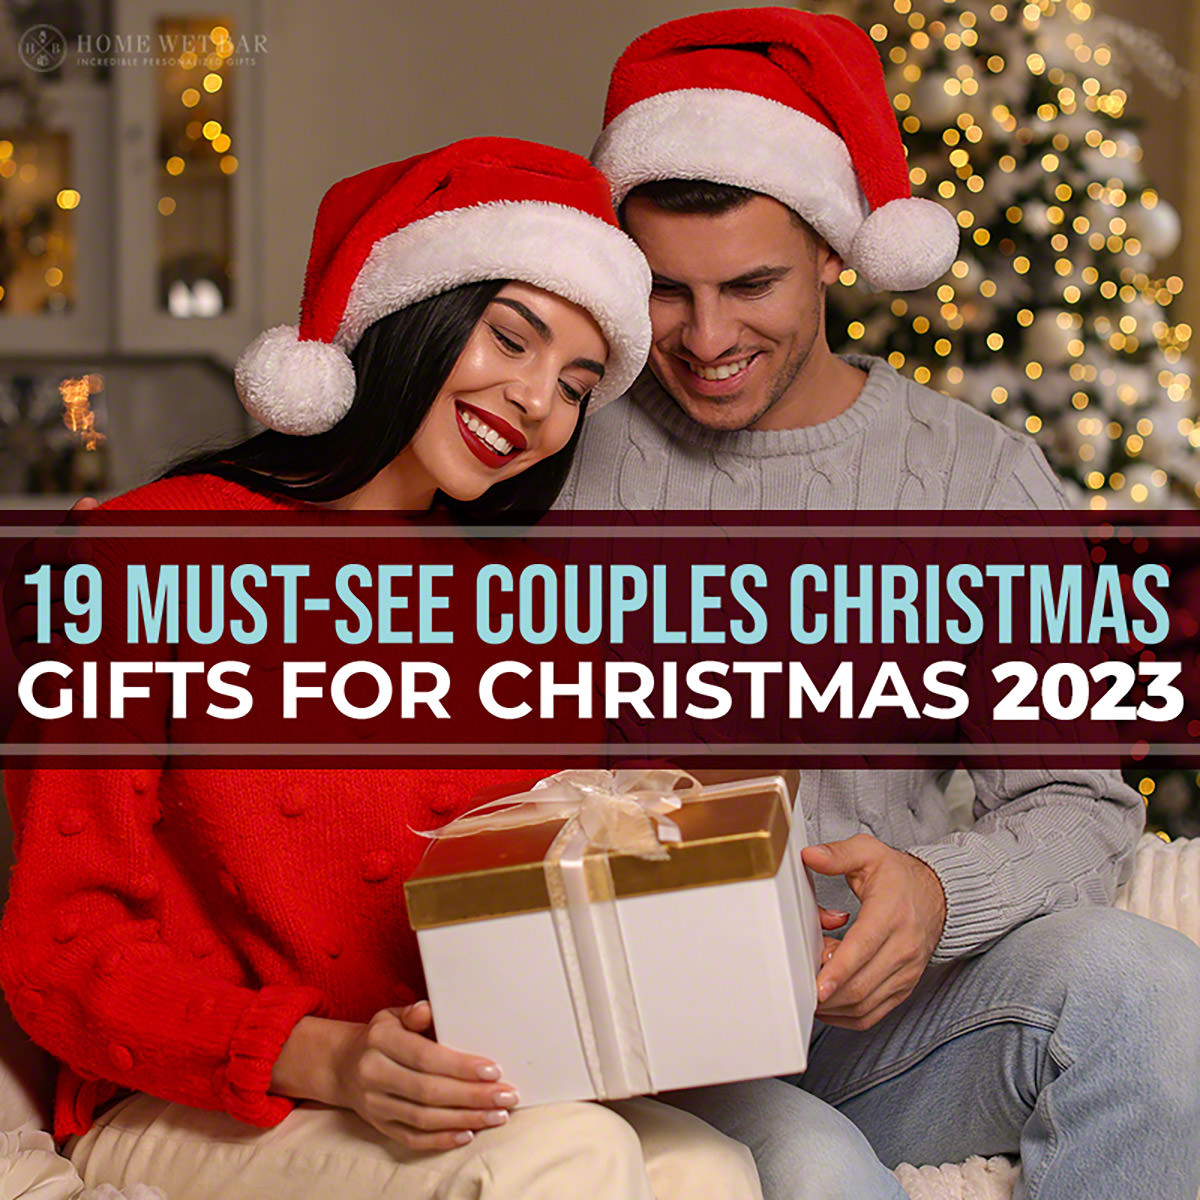 https://www.homewetbar.com/blog/wp-content/uploads/2021/07/19-Must-See-Couples-Chrismtas-Gifts-For-Christmas-2023.jpg